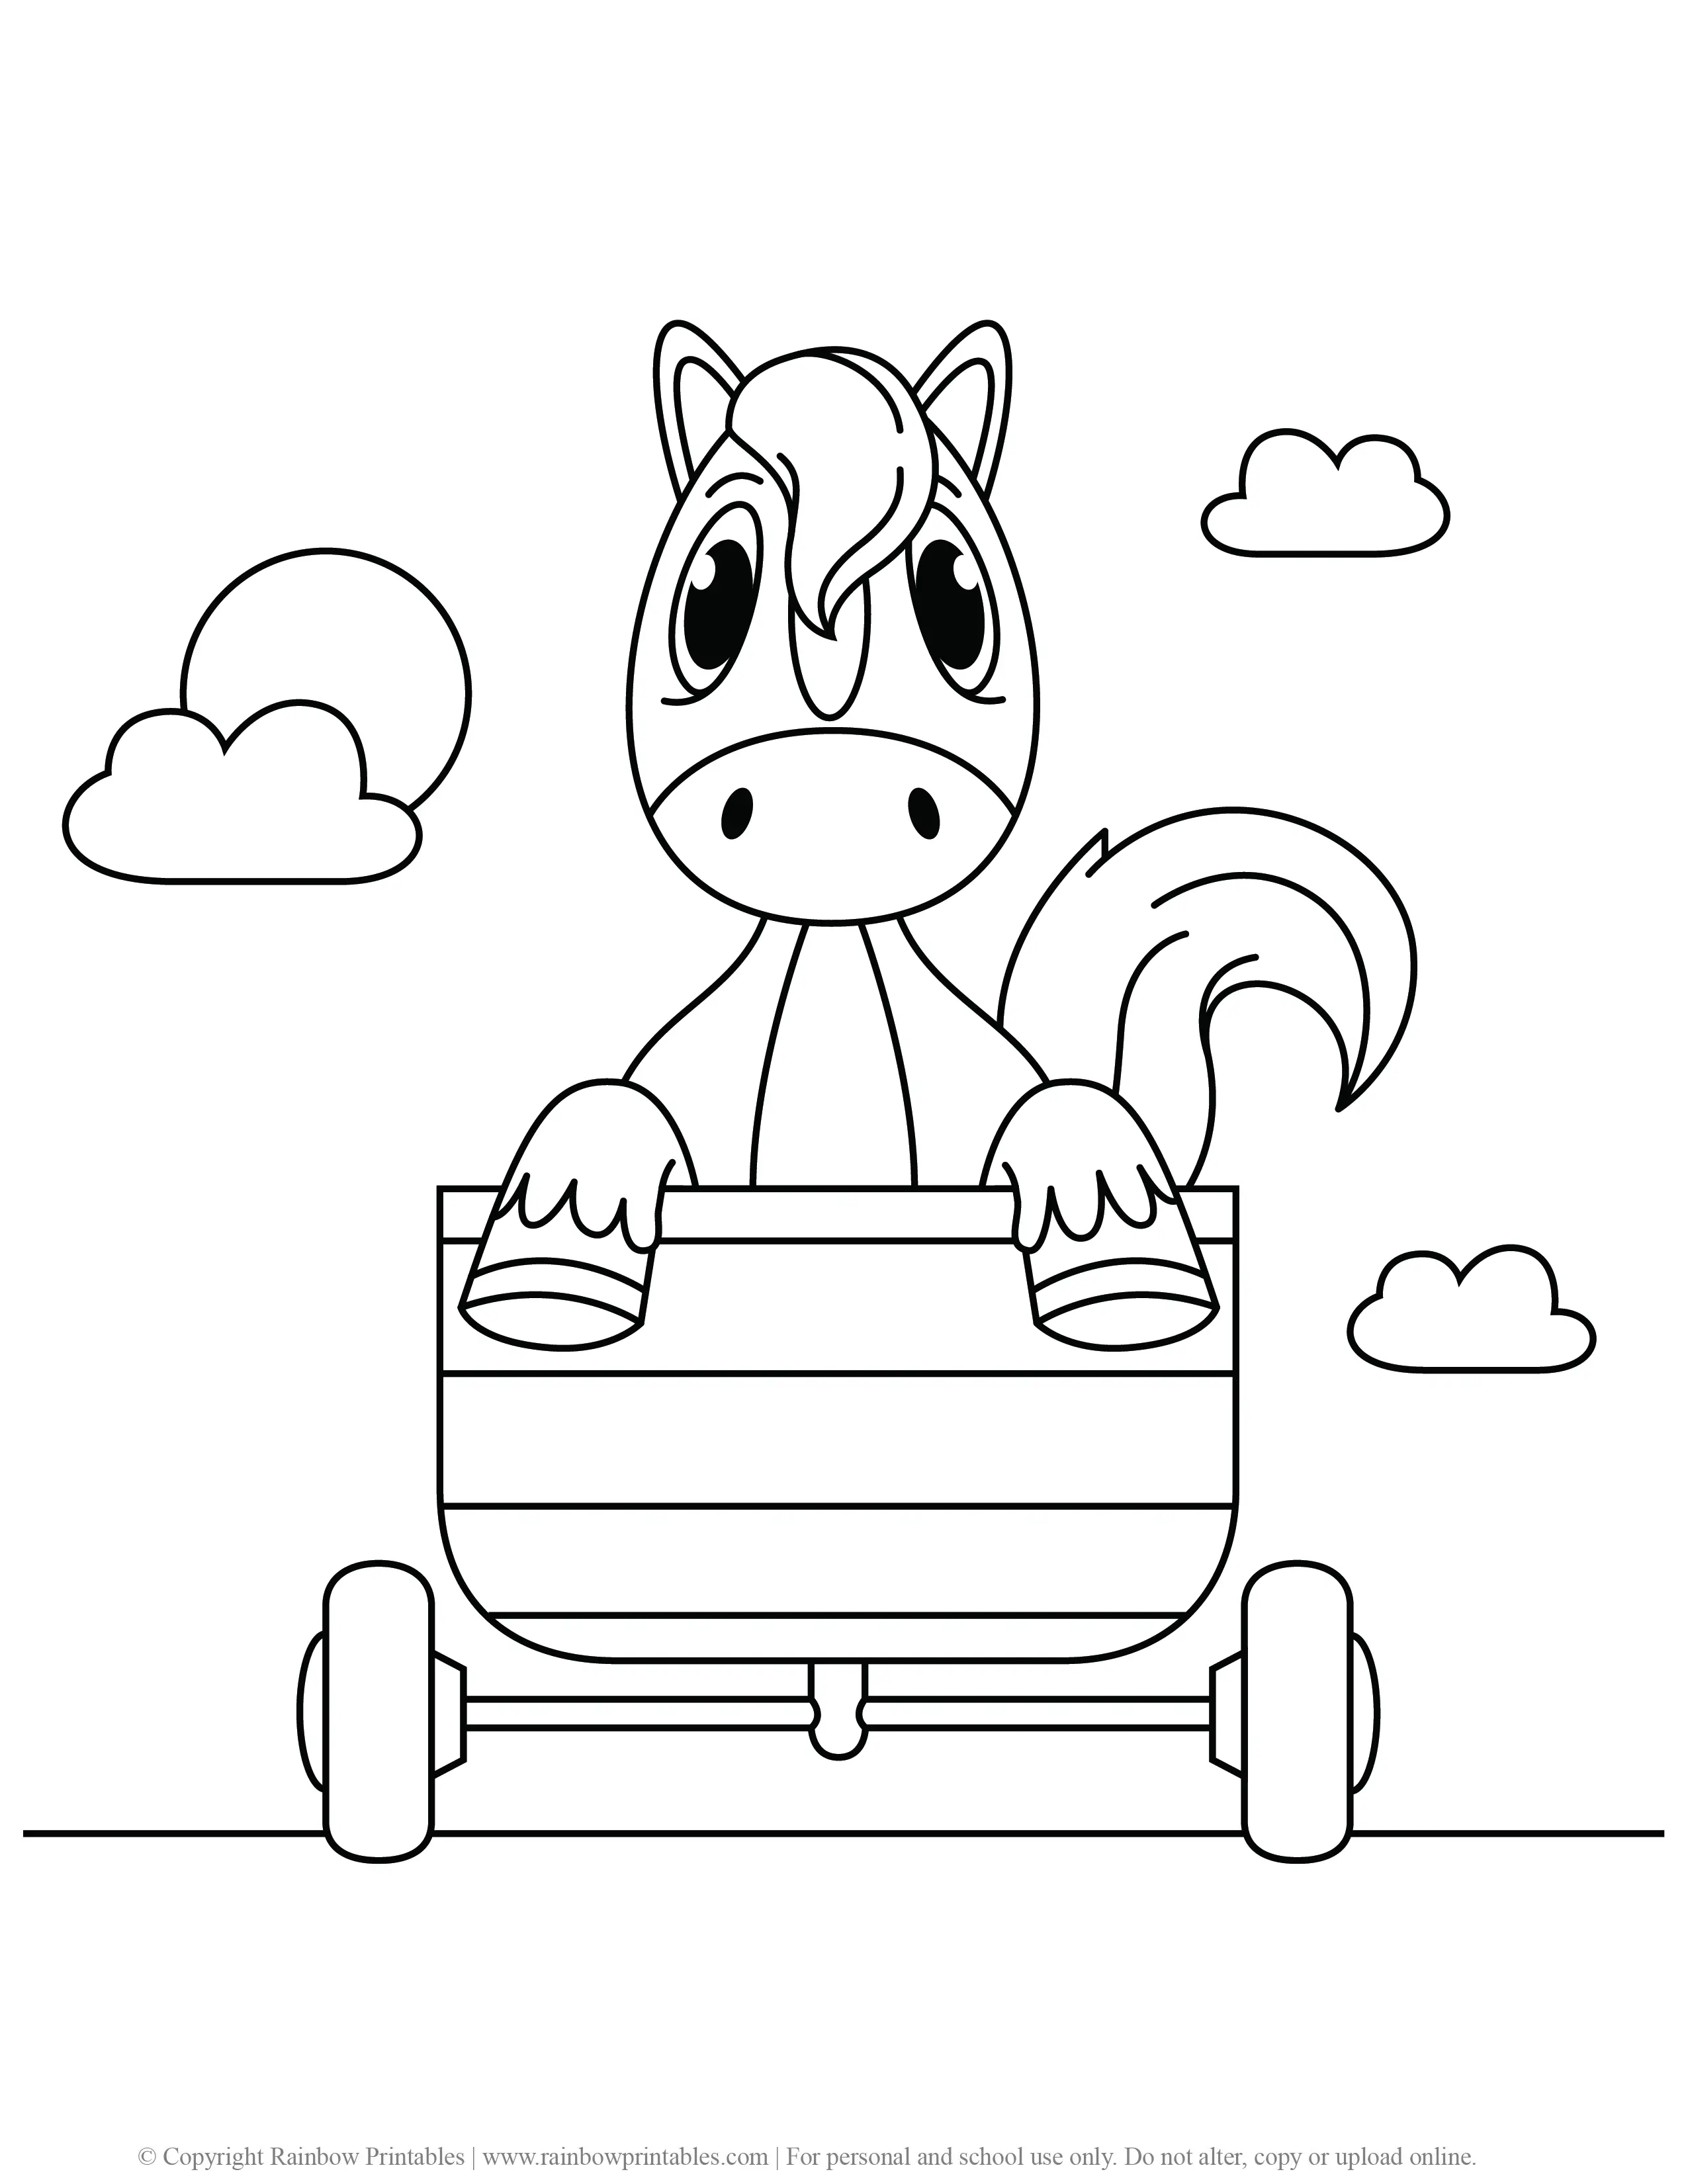 CUTE CARTOON HORSE PONY COLORING PAGES FOR CHILDREN PRINTABLE ACTIVITY